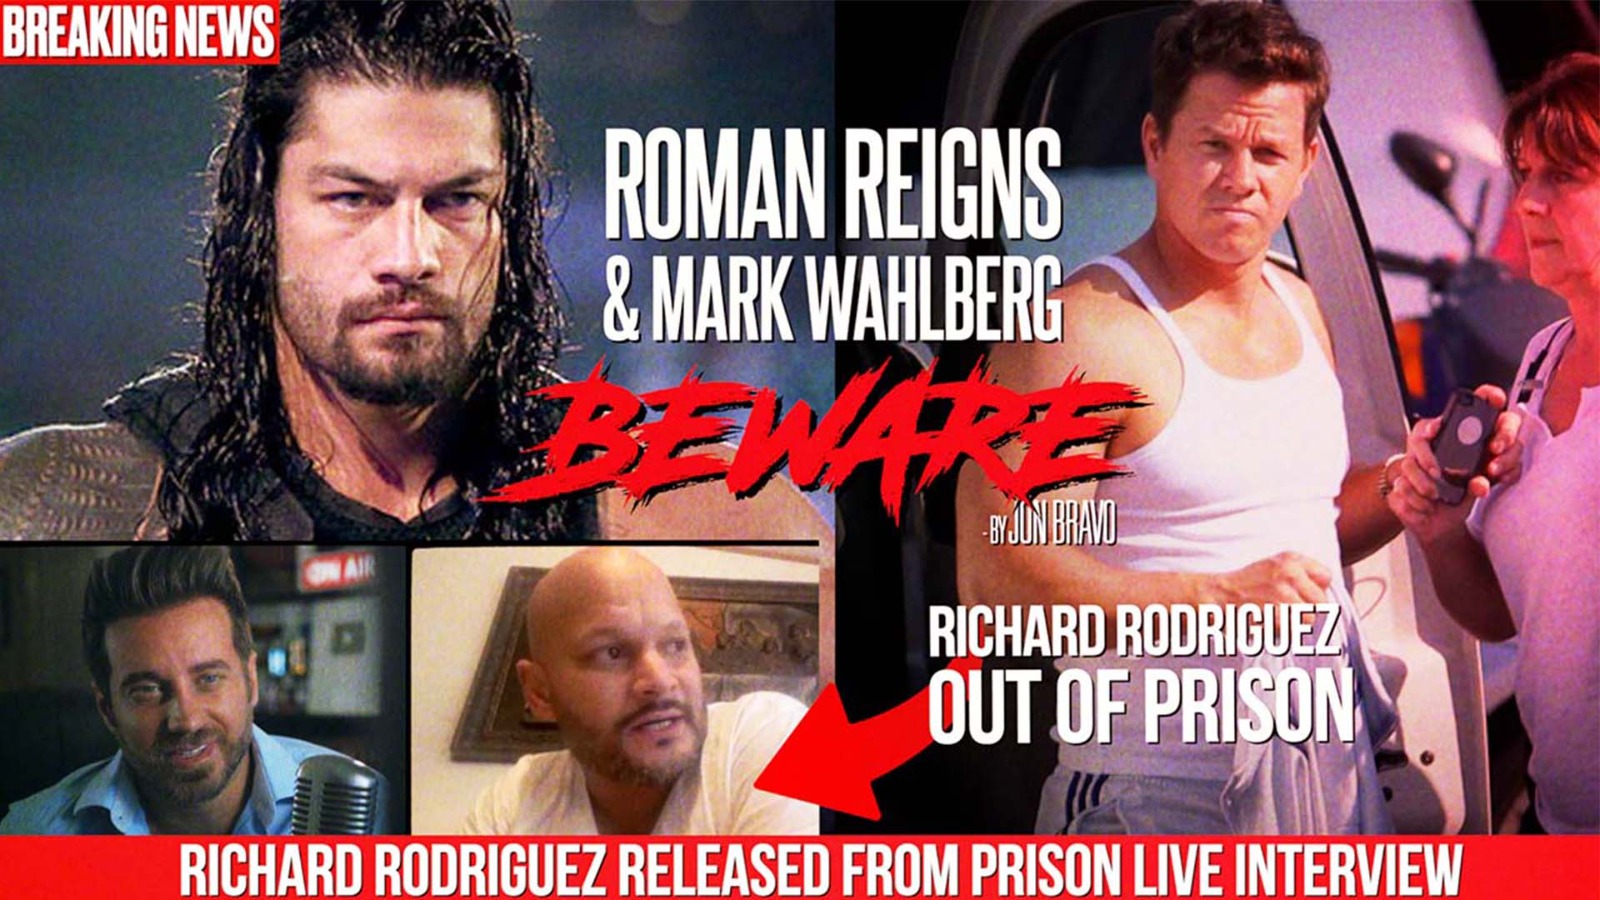 Anabolic Steroid Claims Against Roman Reigns & Mark Wahlberg